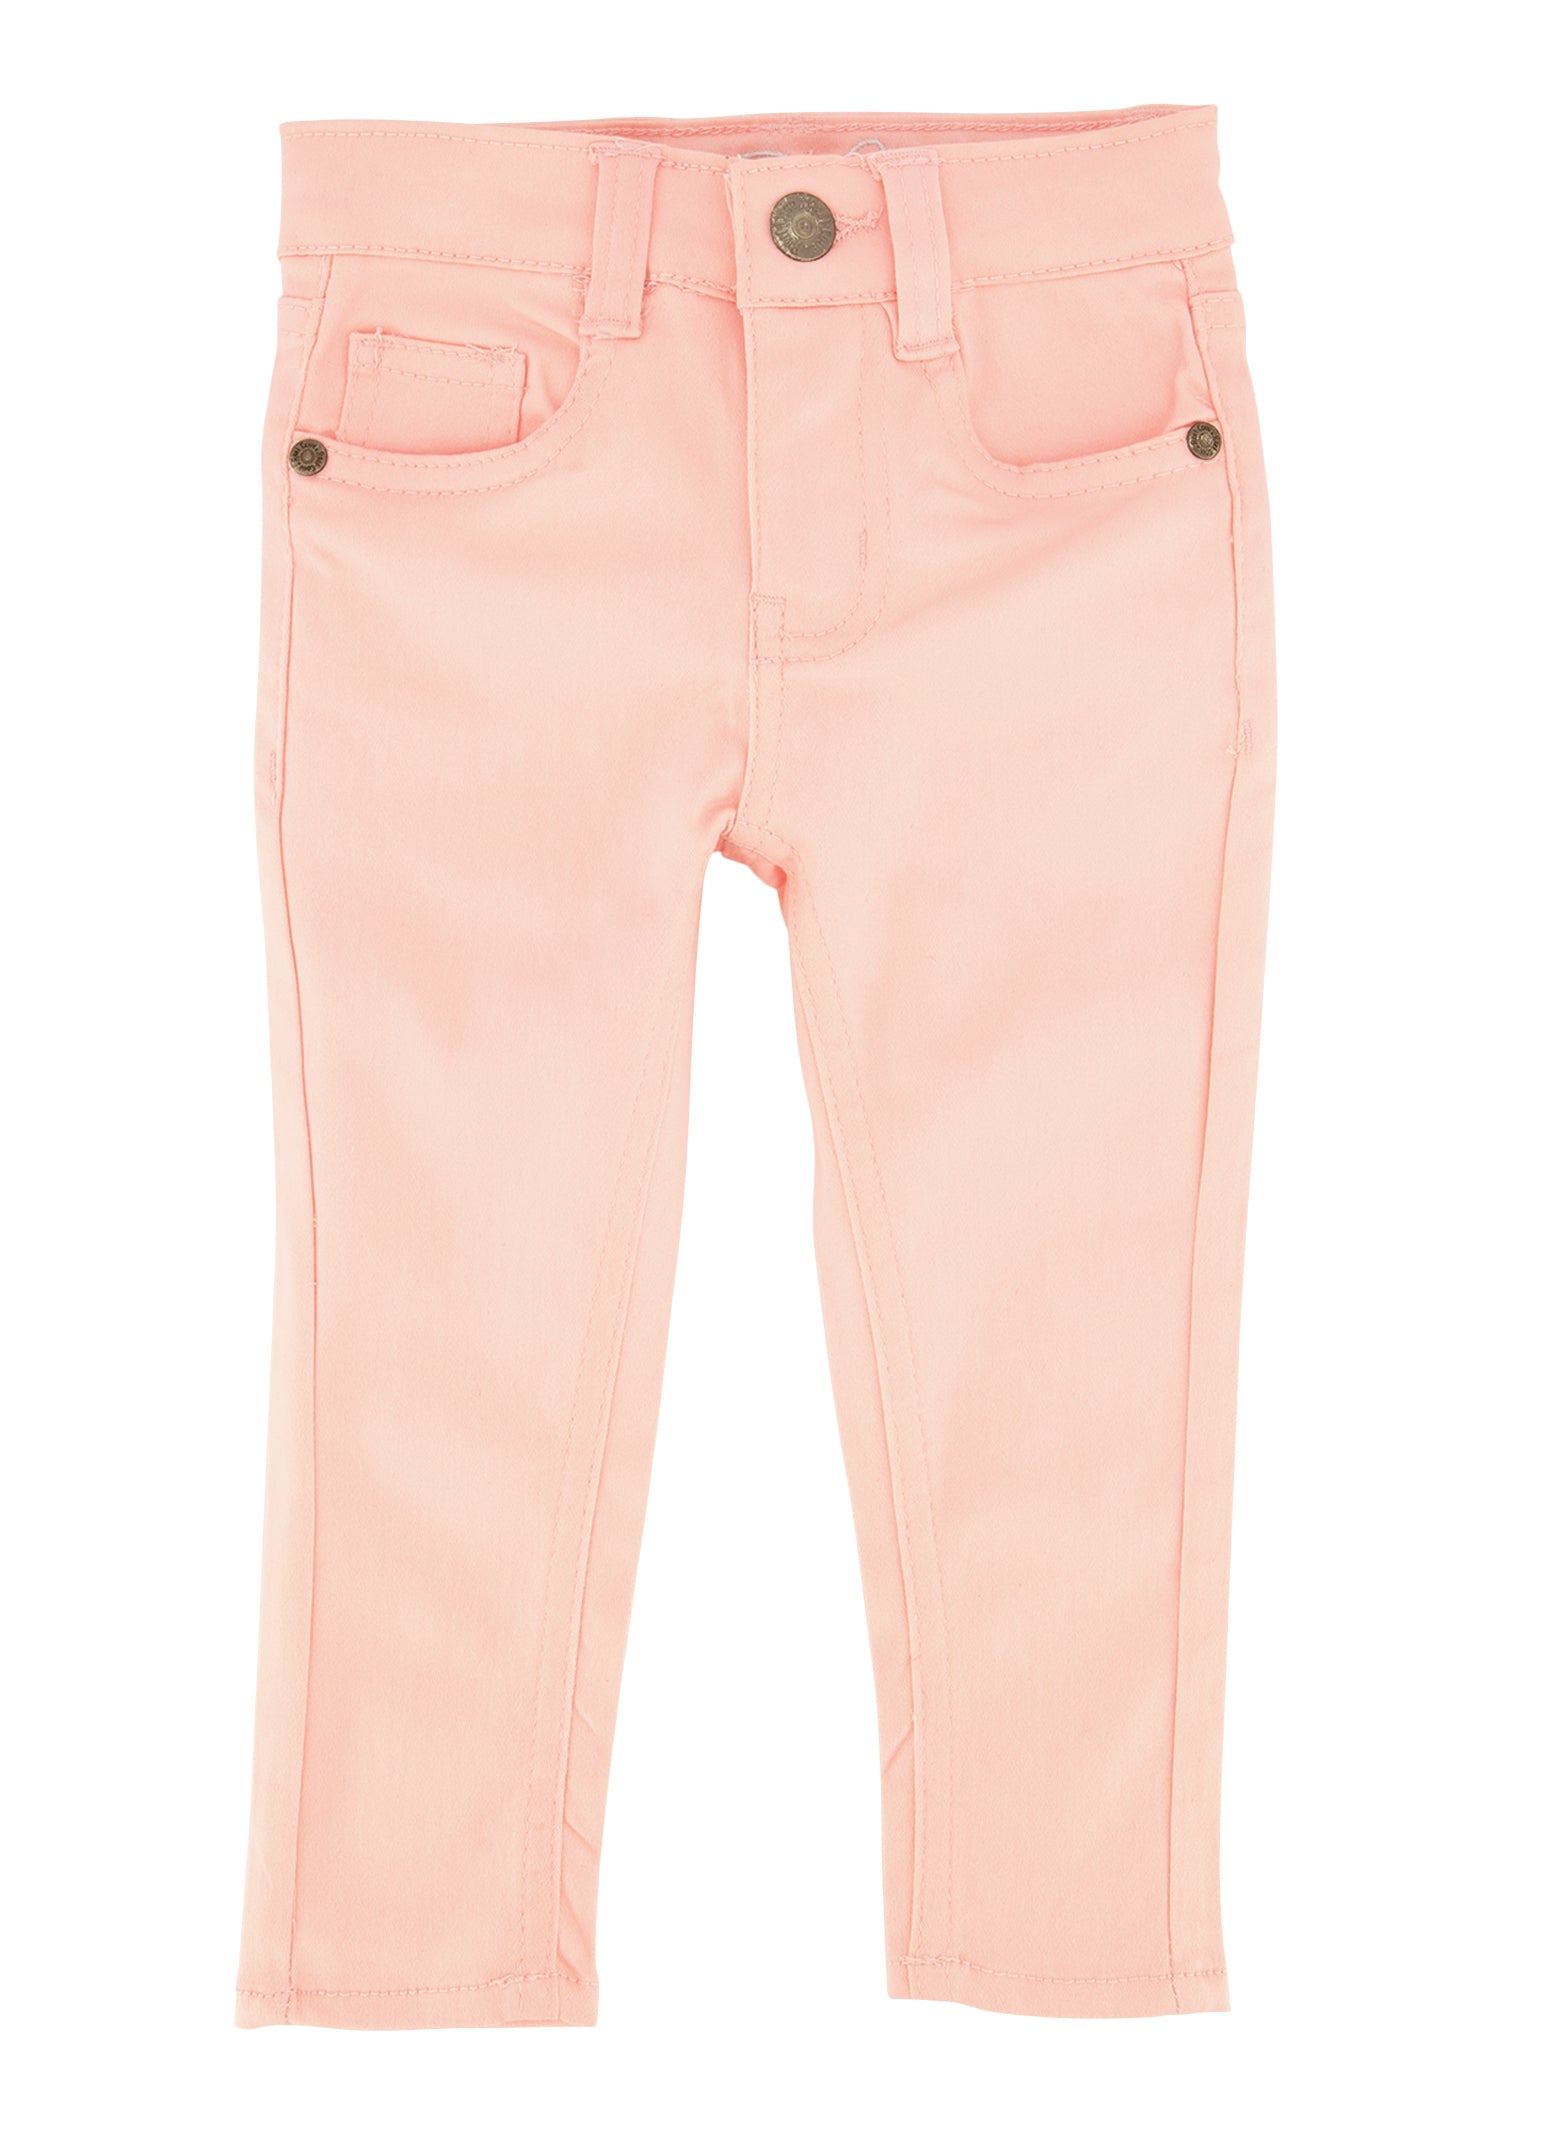 Toddler Girls Solid Twill Jeggings - Pink